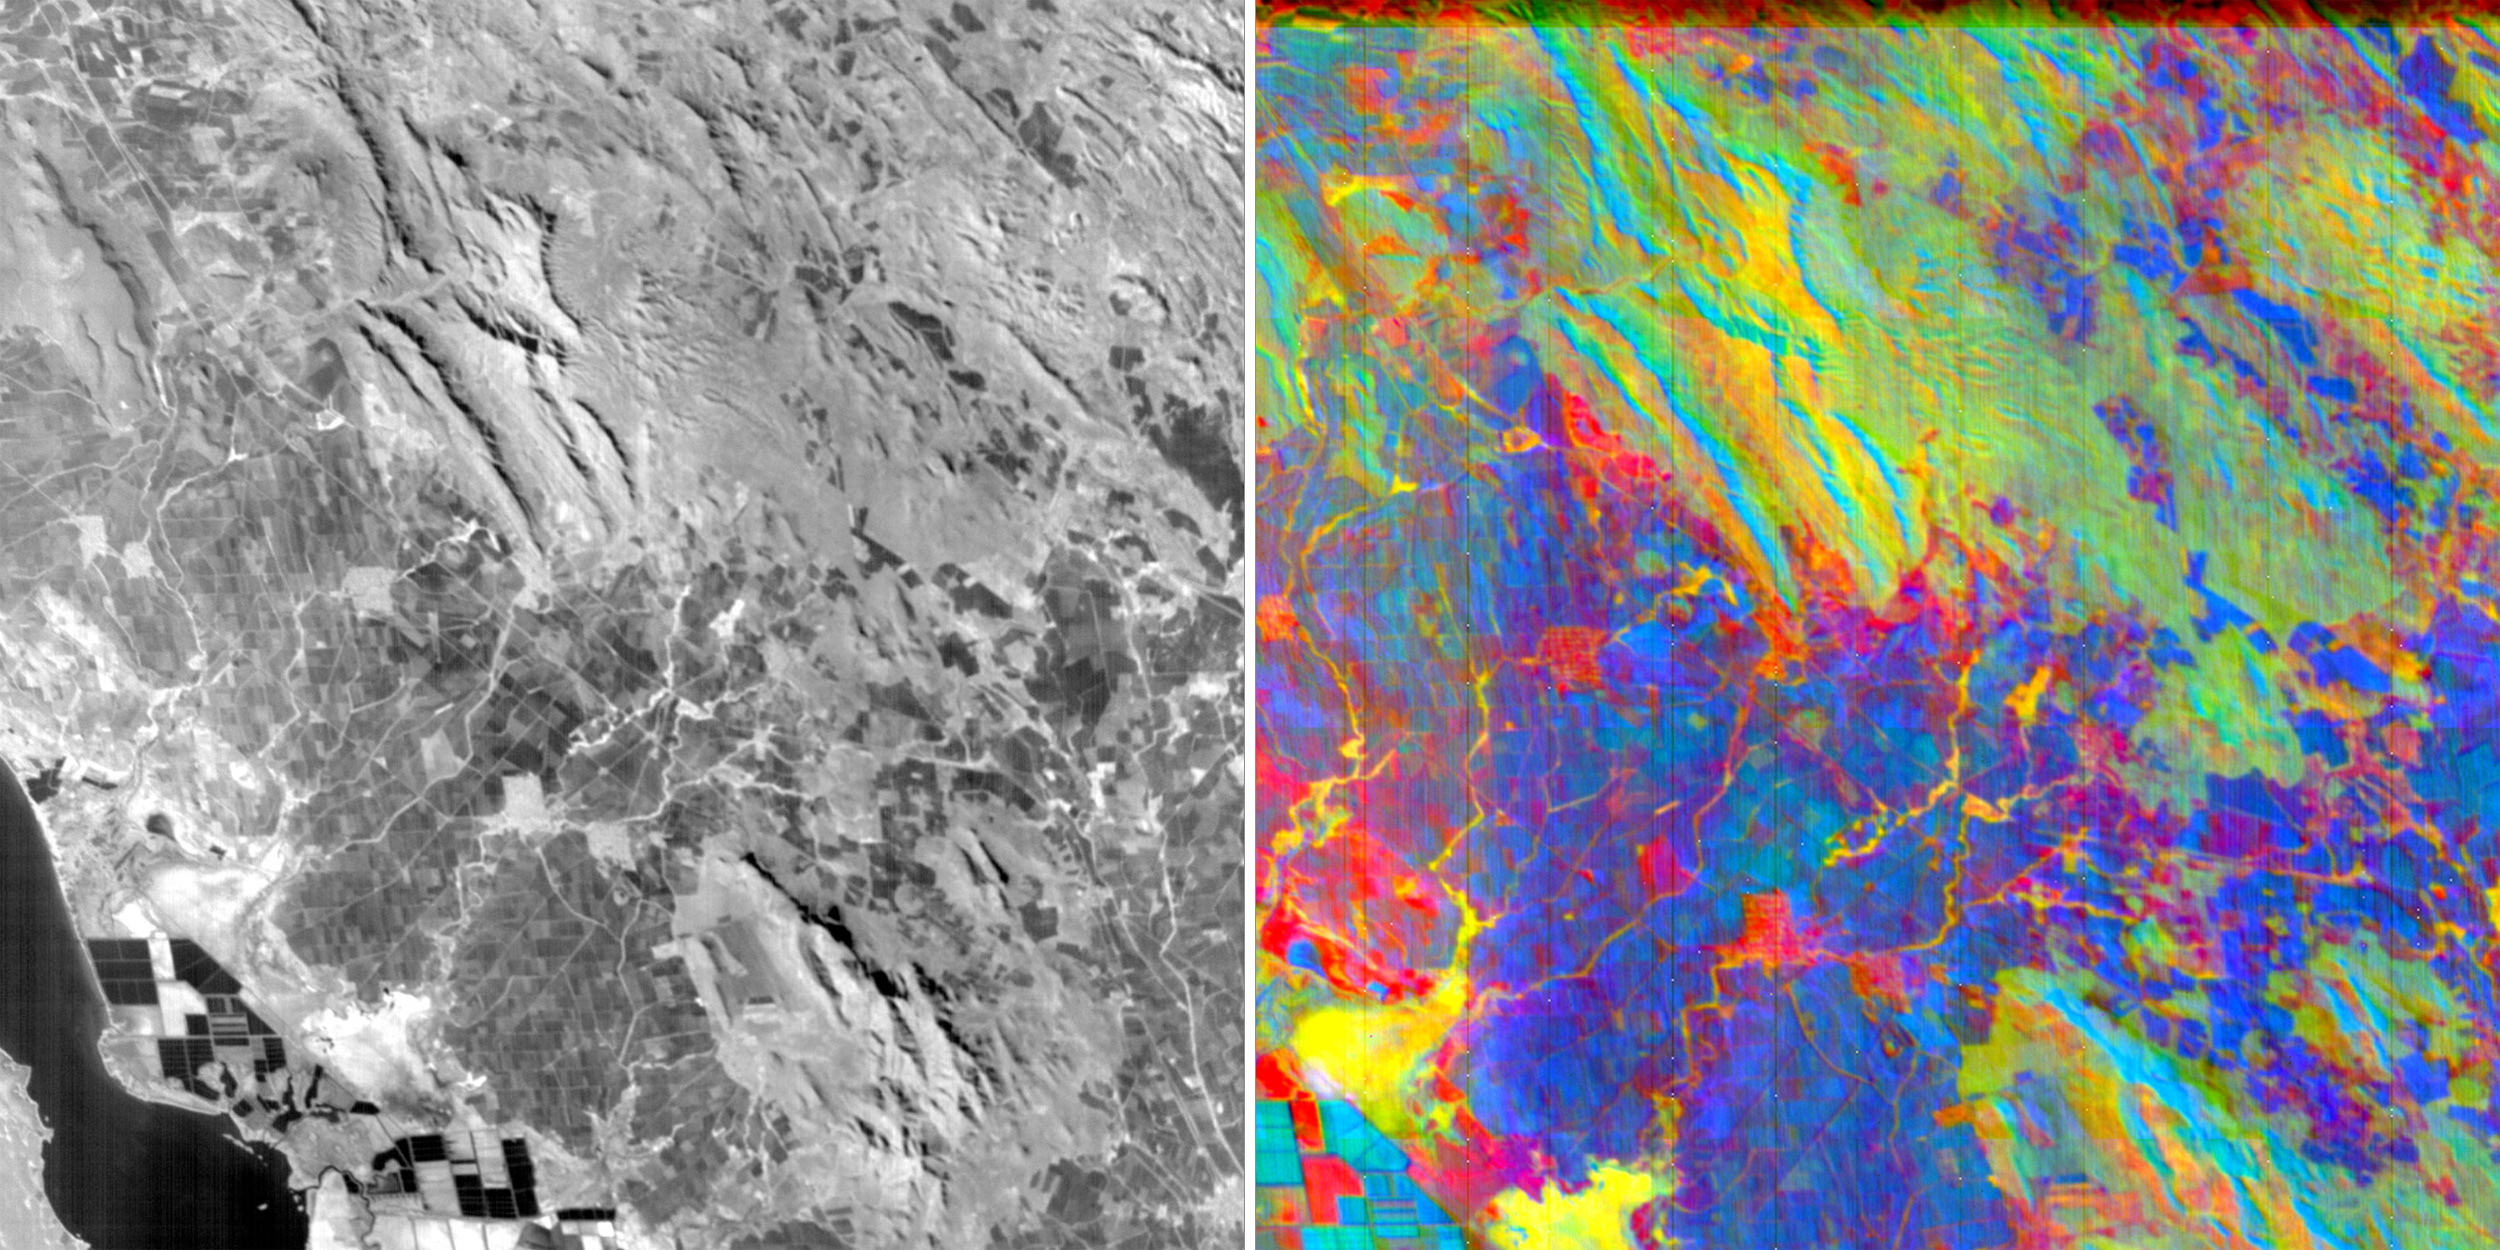 Monochrome image on left and hyperspectral image on right of a satellite view of mountains.